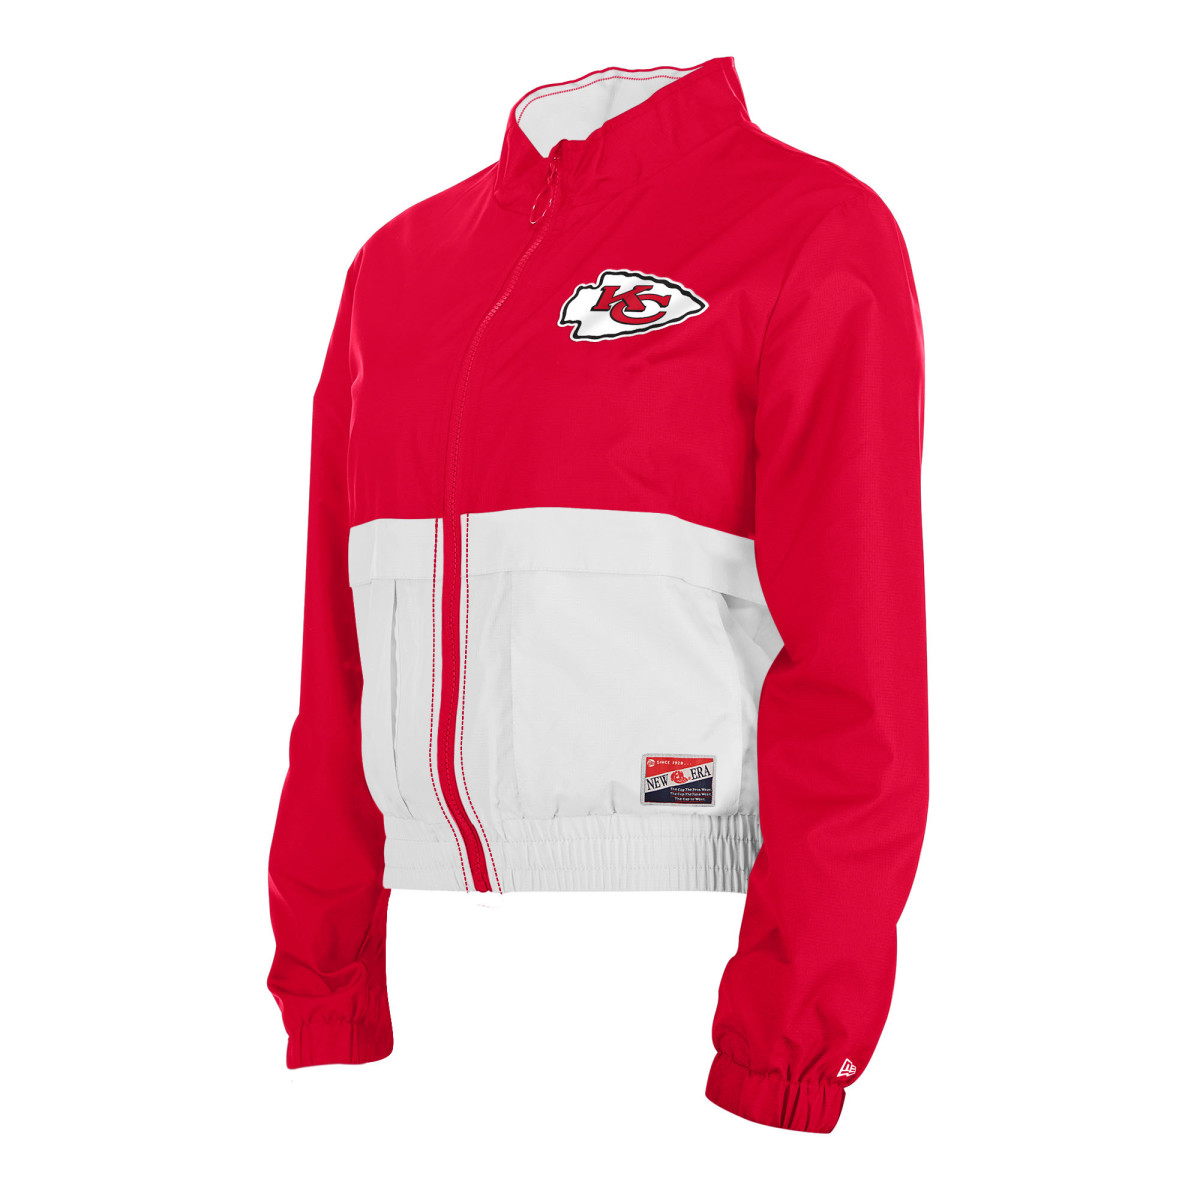 Taylor Swift's Kansas City Chiefs Jacket from New Era is now